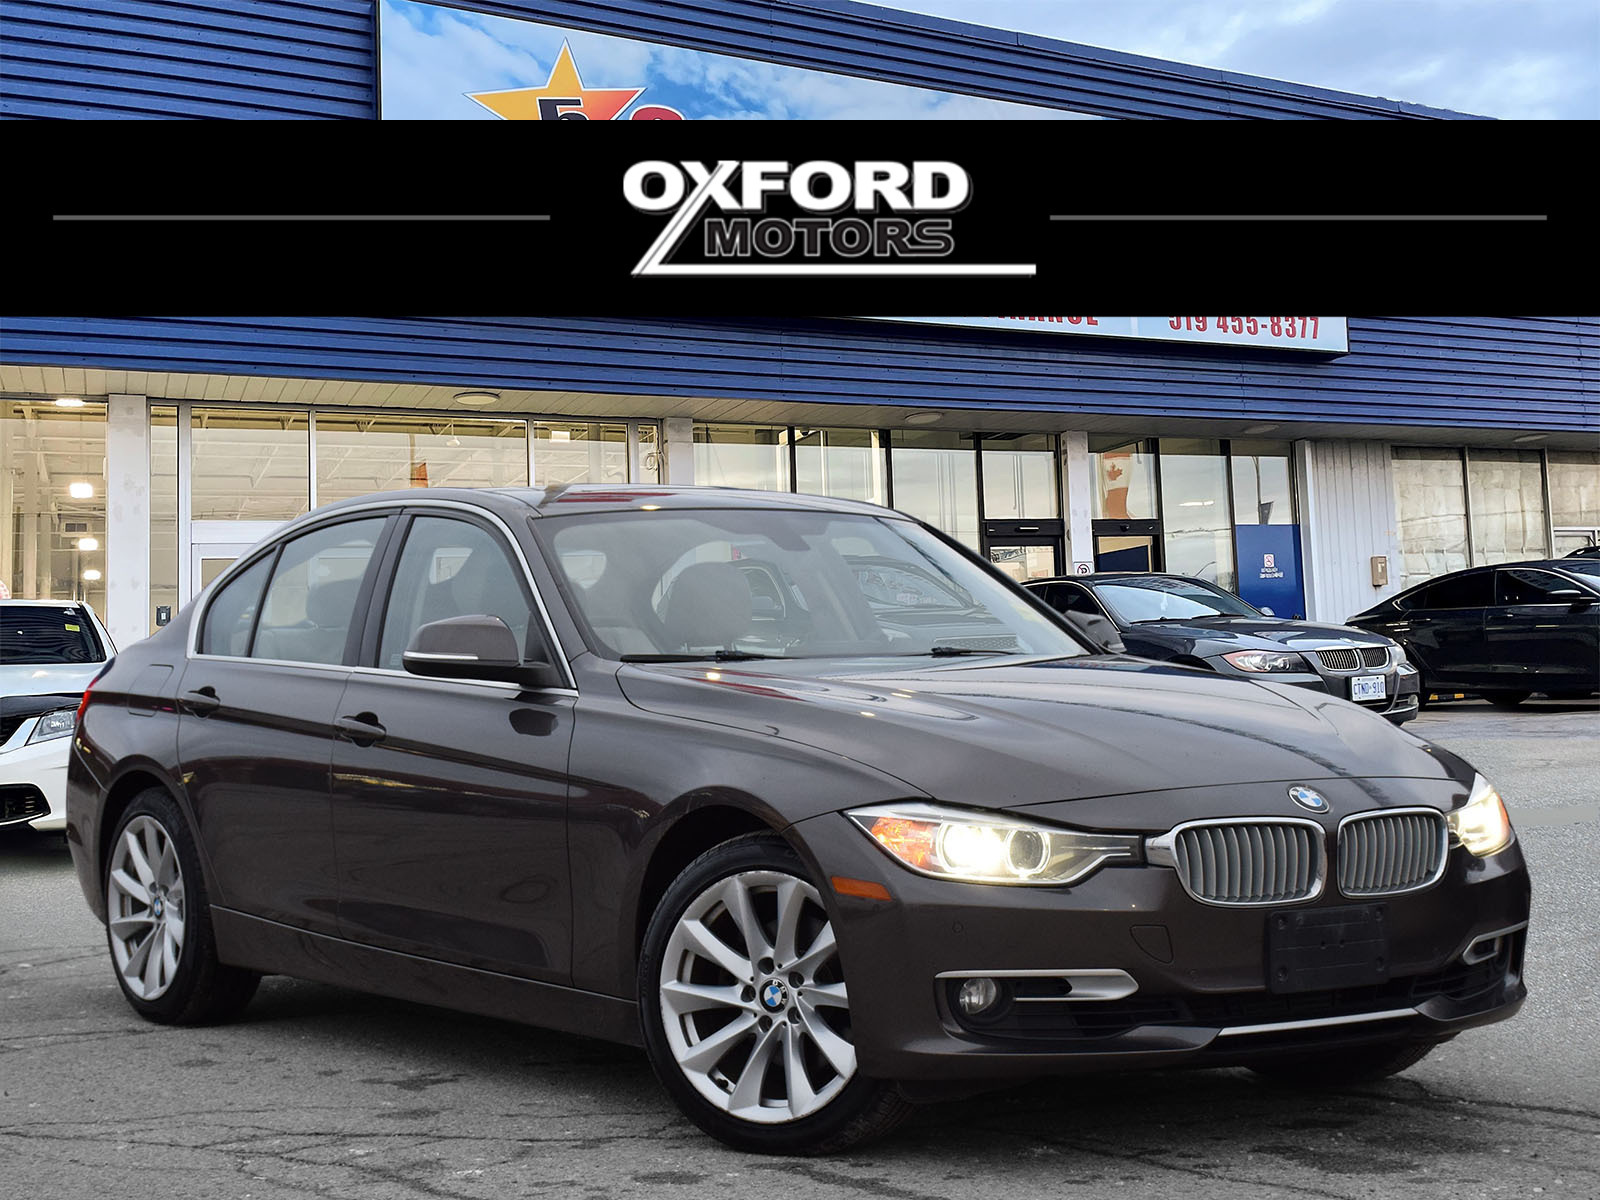 2014 BMW 3 Series NAV LEATHER SUNROOF LOADED! WE FINANCE ALL CREDIT